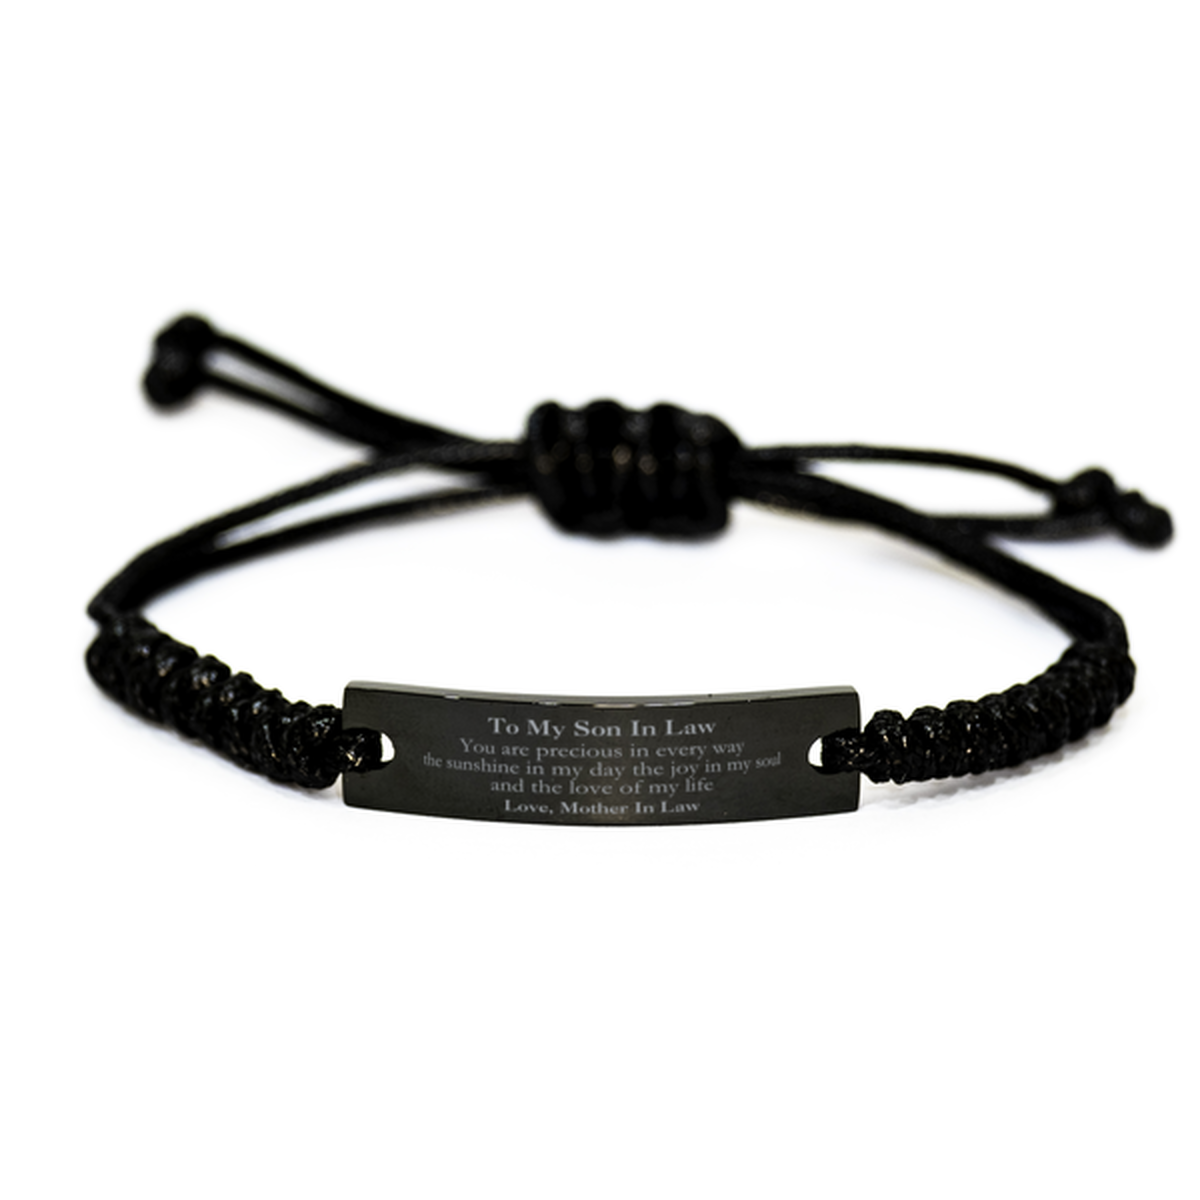 Graduation Gifts for Son In Law Black Rope Bracelet Present from Mother In Law, Christmas Son In Law Birthday Gifts Son In Law You are precious in every way the sunshine in my day. Love, Mother In Law